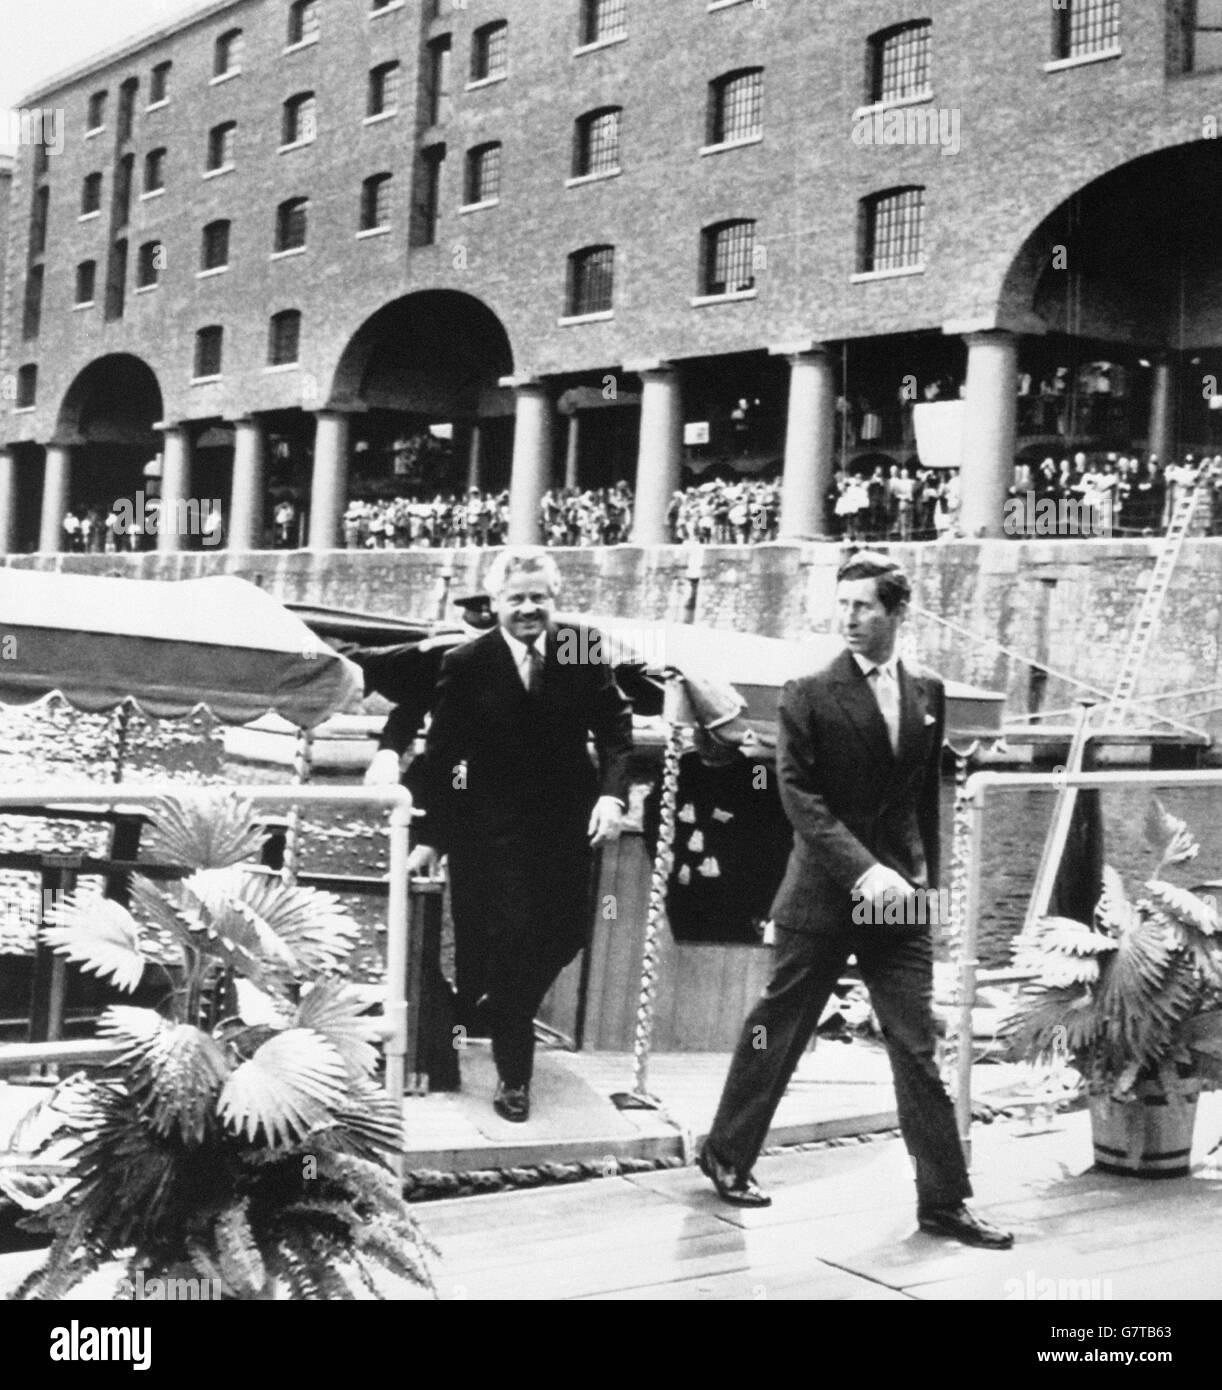 The Prince of Wales steps off a barge in Liverpool's Albert Dock, 142 years after it was originally opened by his great, great, great grandfather. The Prince opened the dock for the second time and opened the new Tate Gallery. He is followed by Philip Carter, Merseyside Development Corporation chairman. Stock Photo